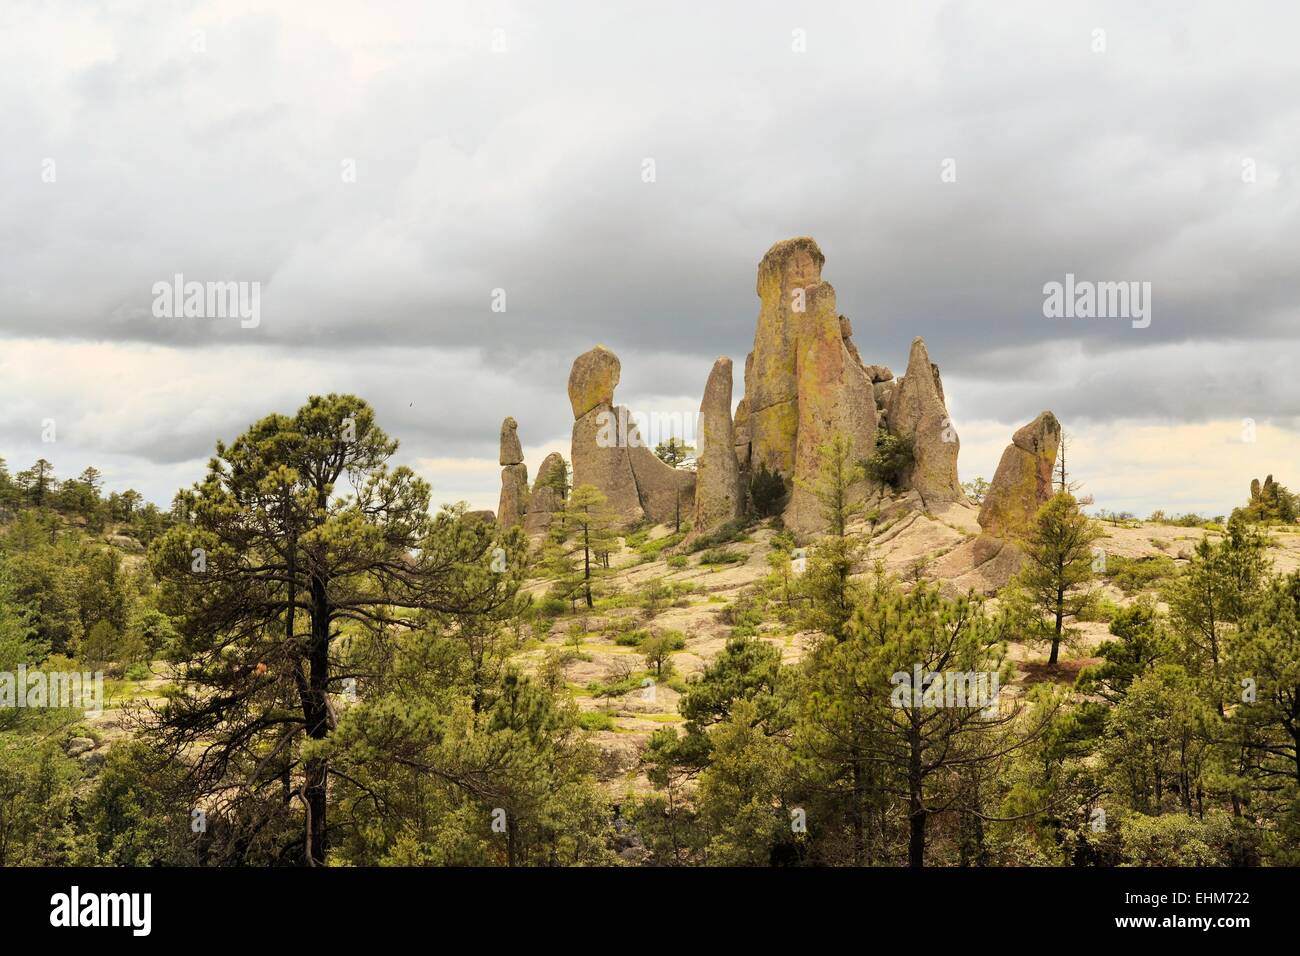 Chimney rock monoliths in Valley of the Monks, Creel, Mexico Stock Photo